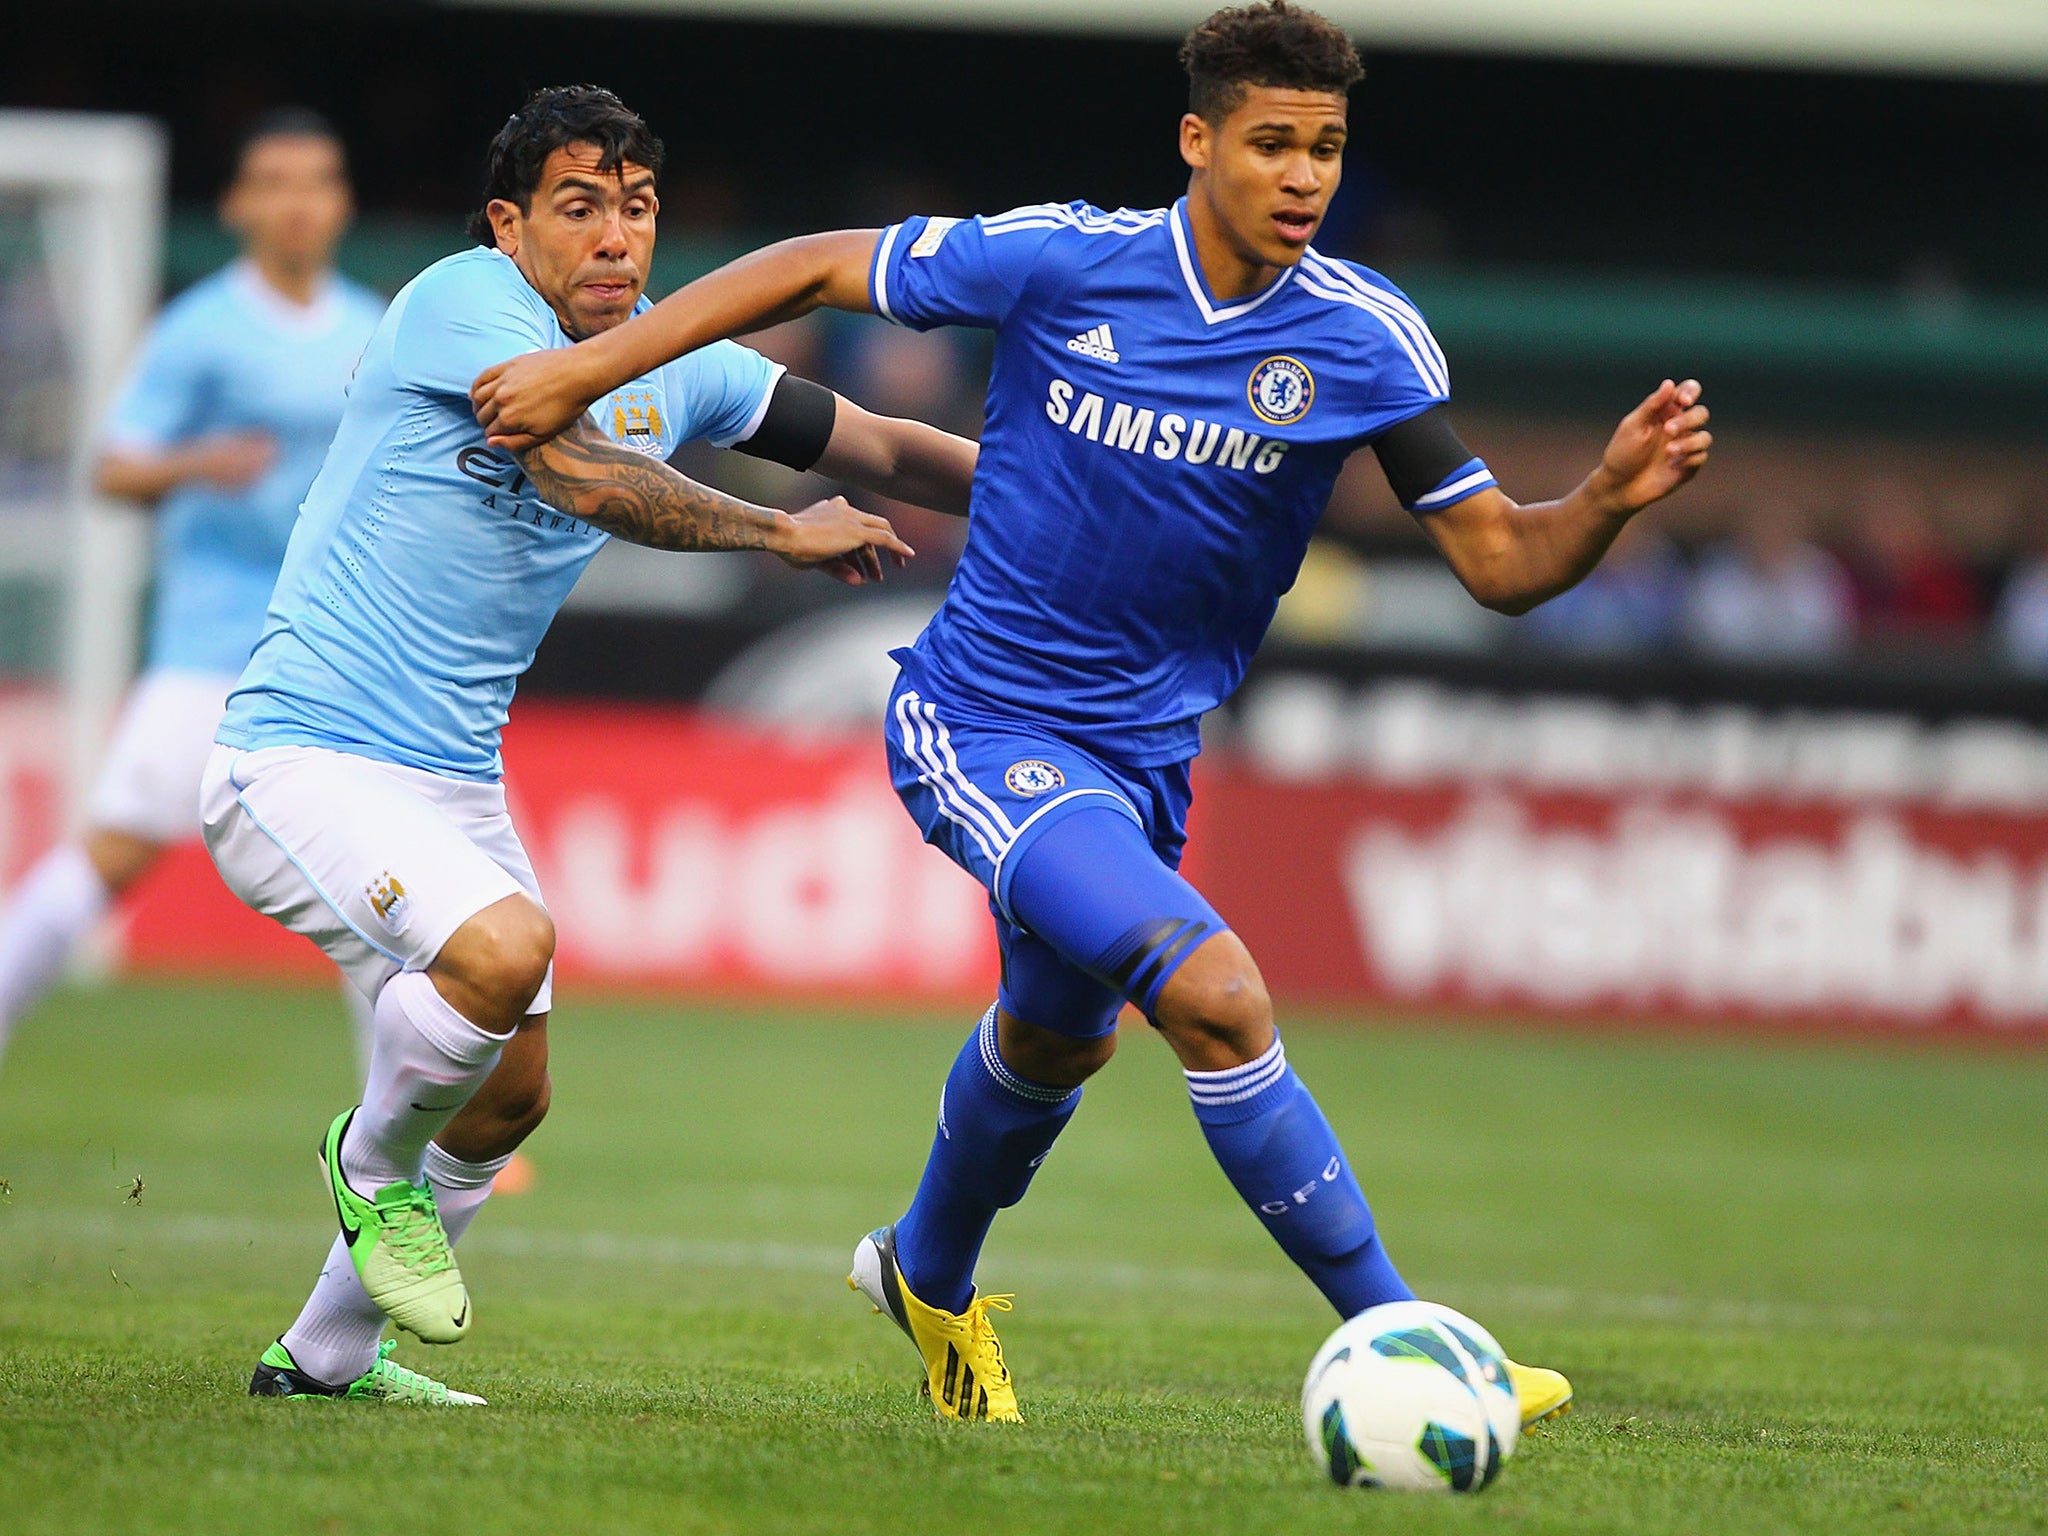 Loftus-Cheek impressed against Manchester City's first-team in the post-season tour of the US in May 2013